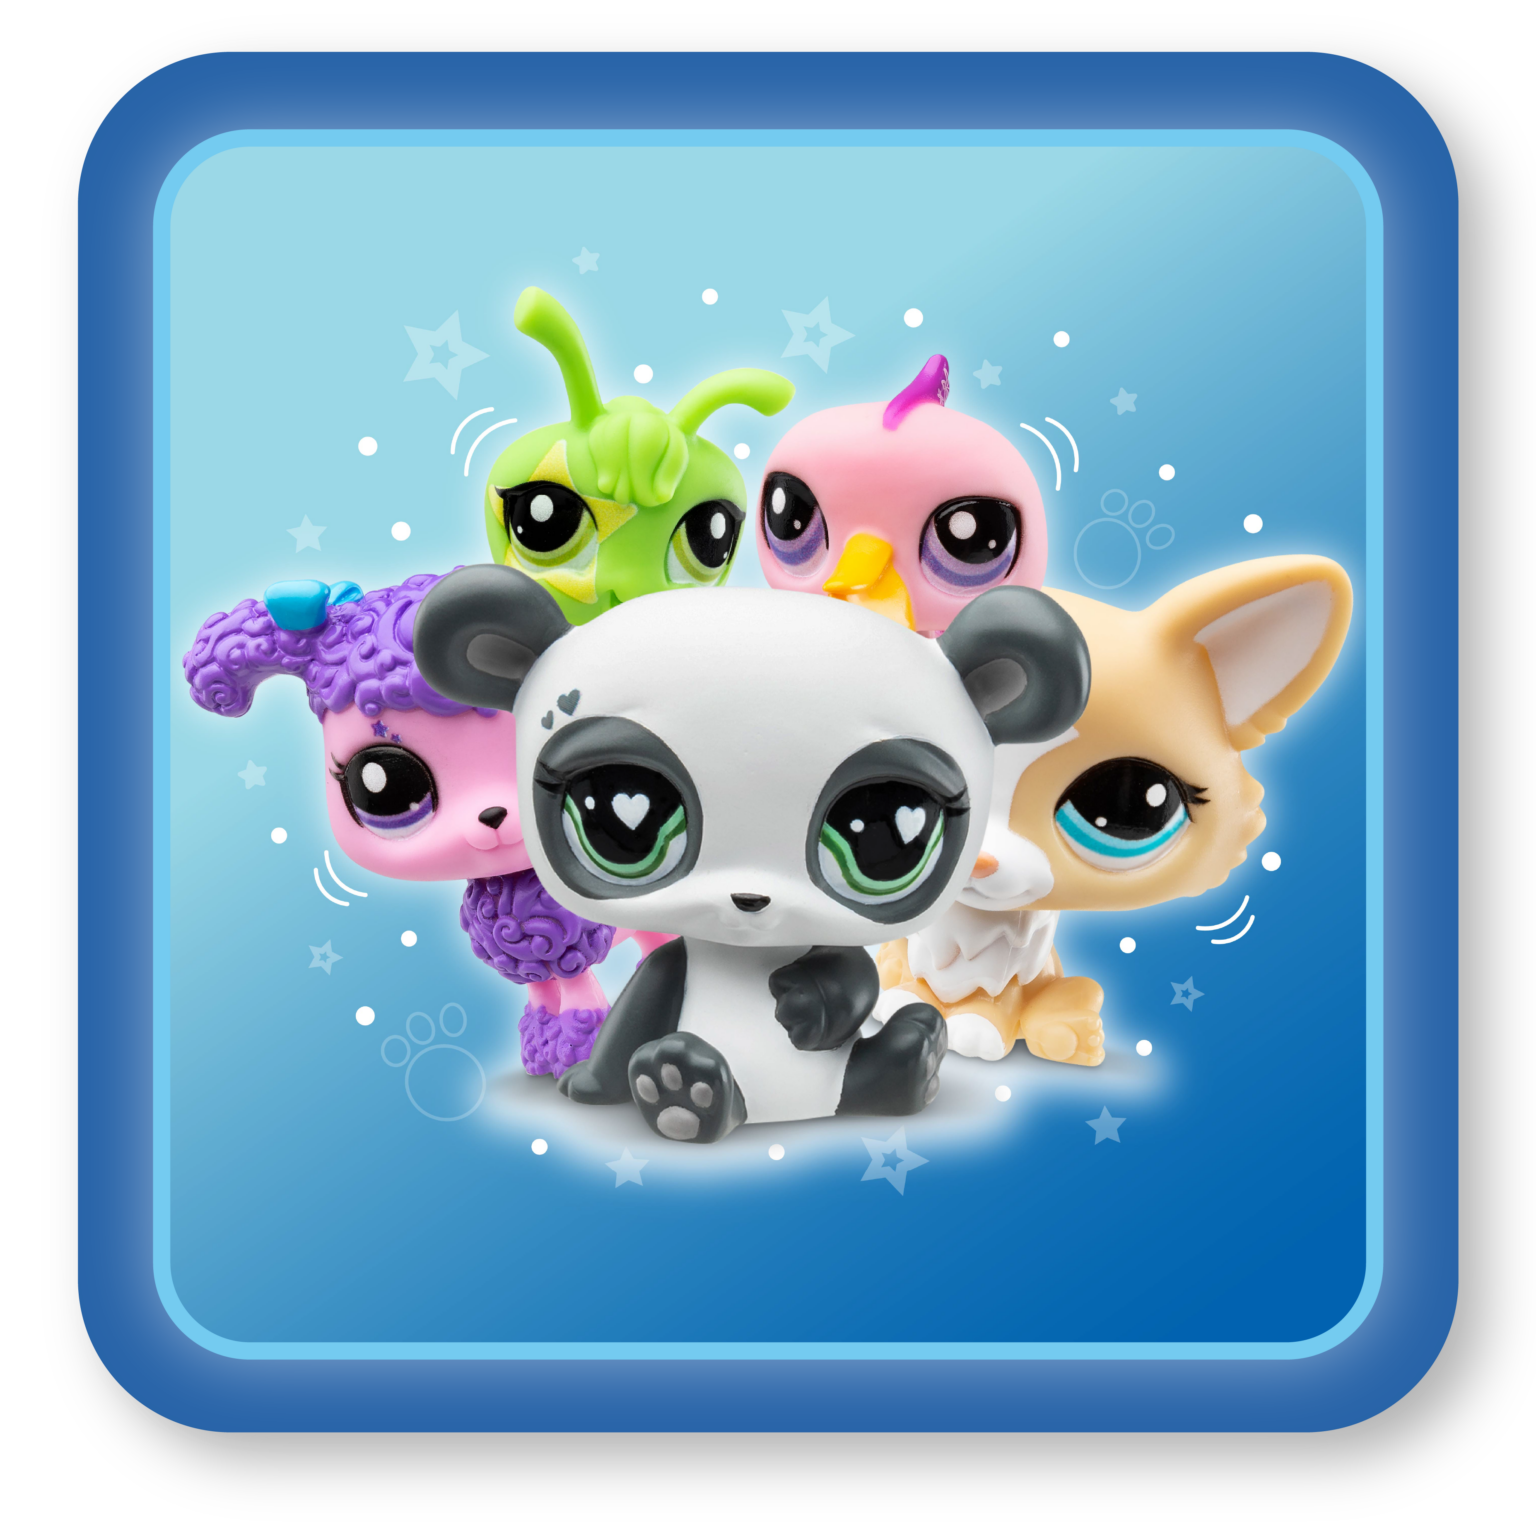 Hasbro and Basic Fun! Ink Global Master Toy License to Relaunch Littlest Pet  Shop - aNb Media, Inc.